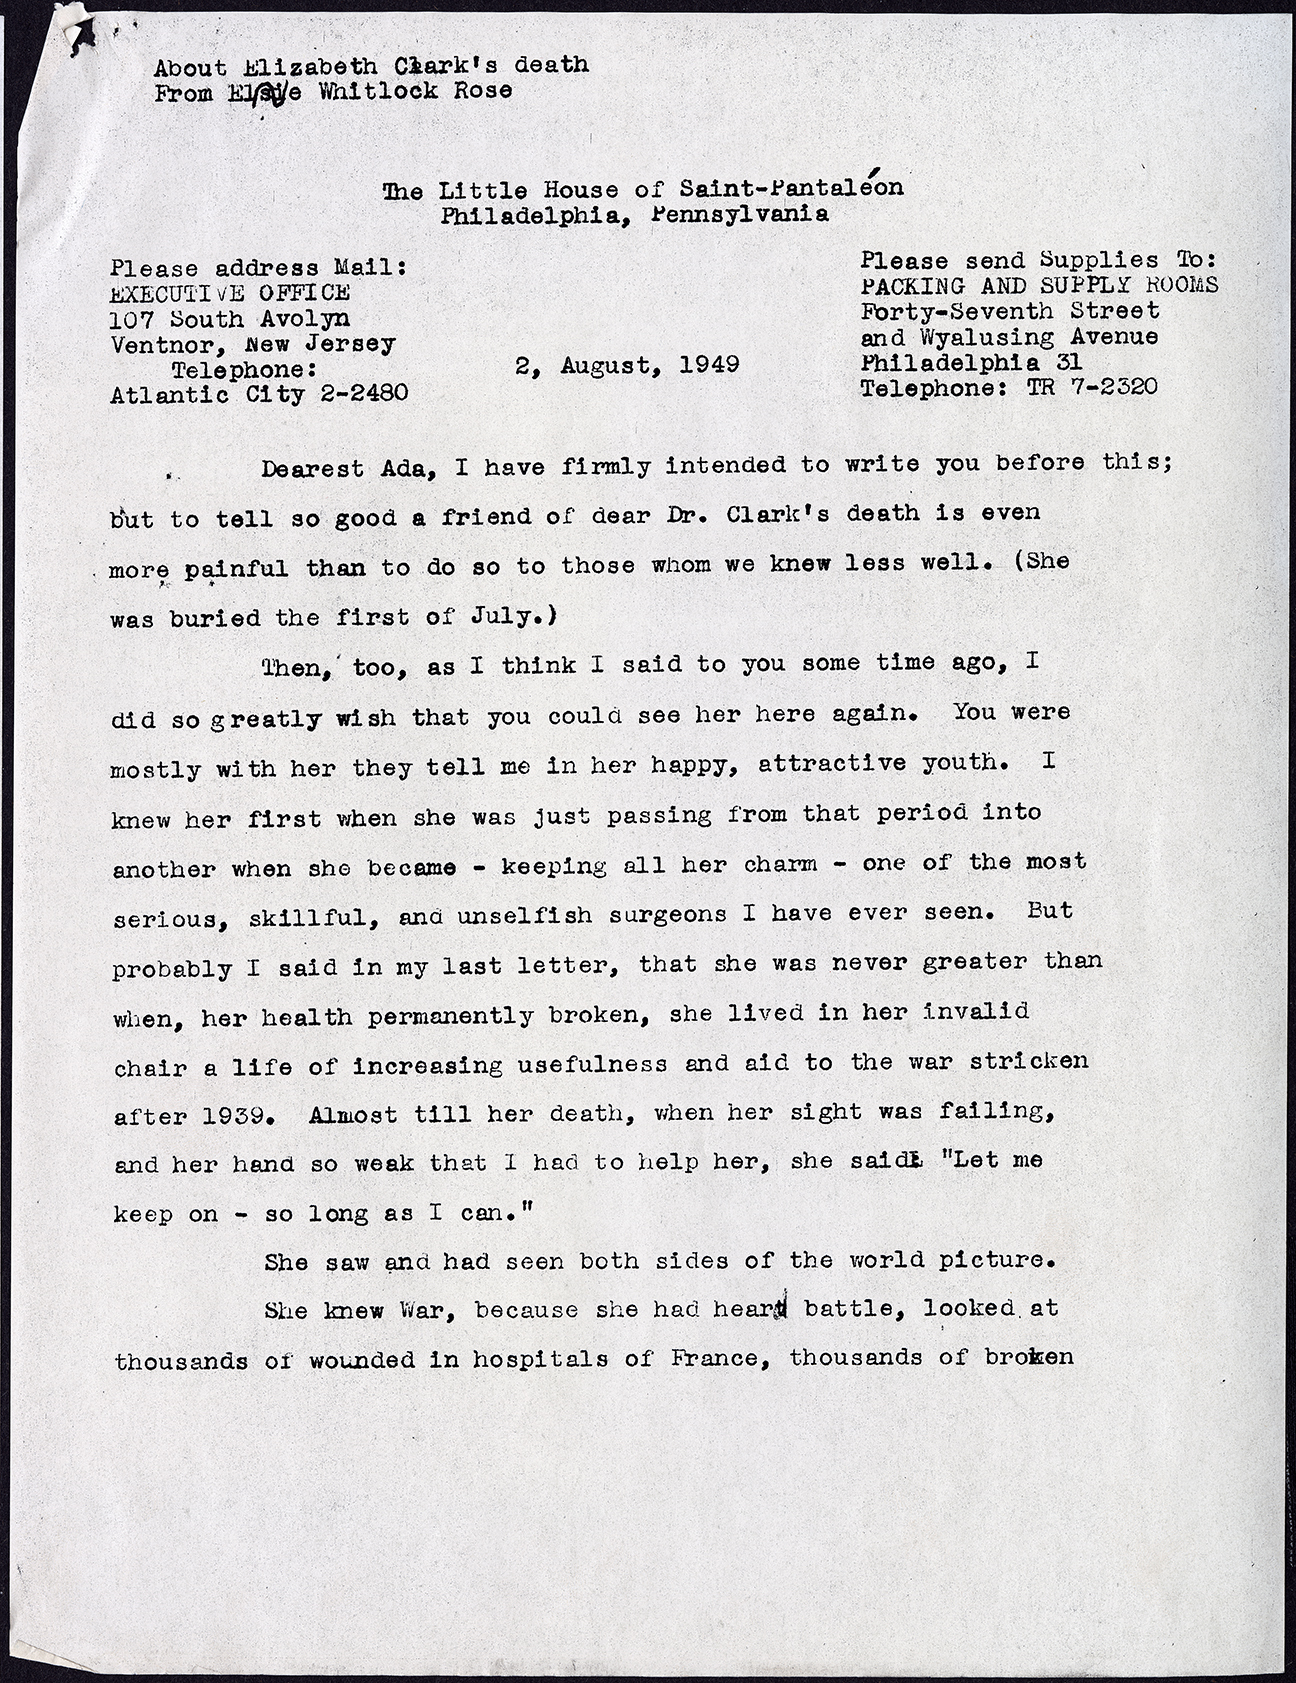 Letter from Elise Whitlock Rose to Ada McCormick, 2 August 1949. (Legacy Center Archives and Special Collections)